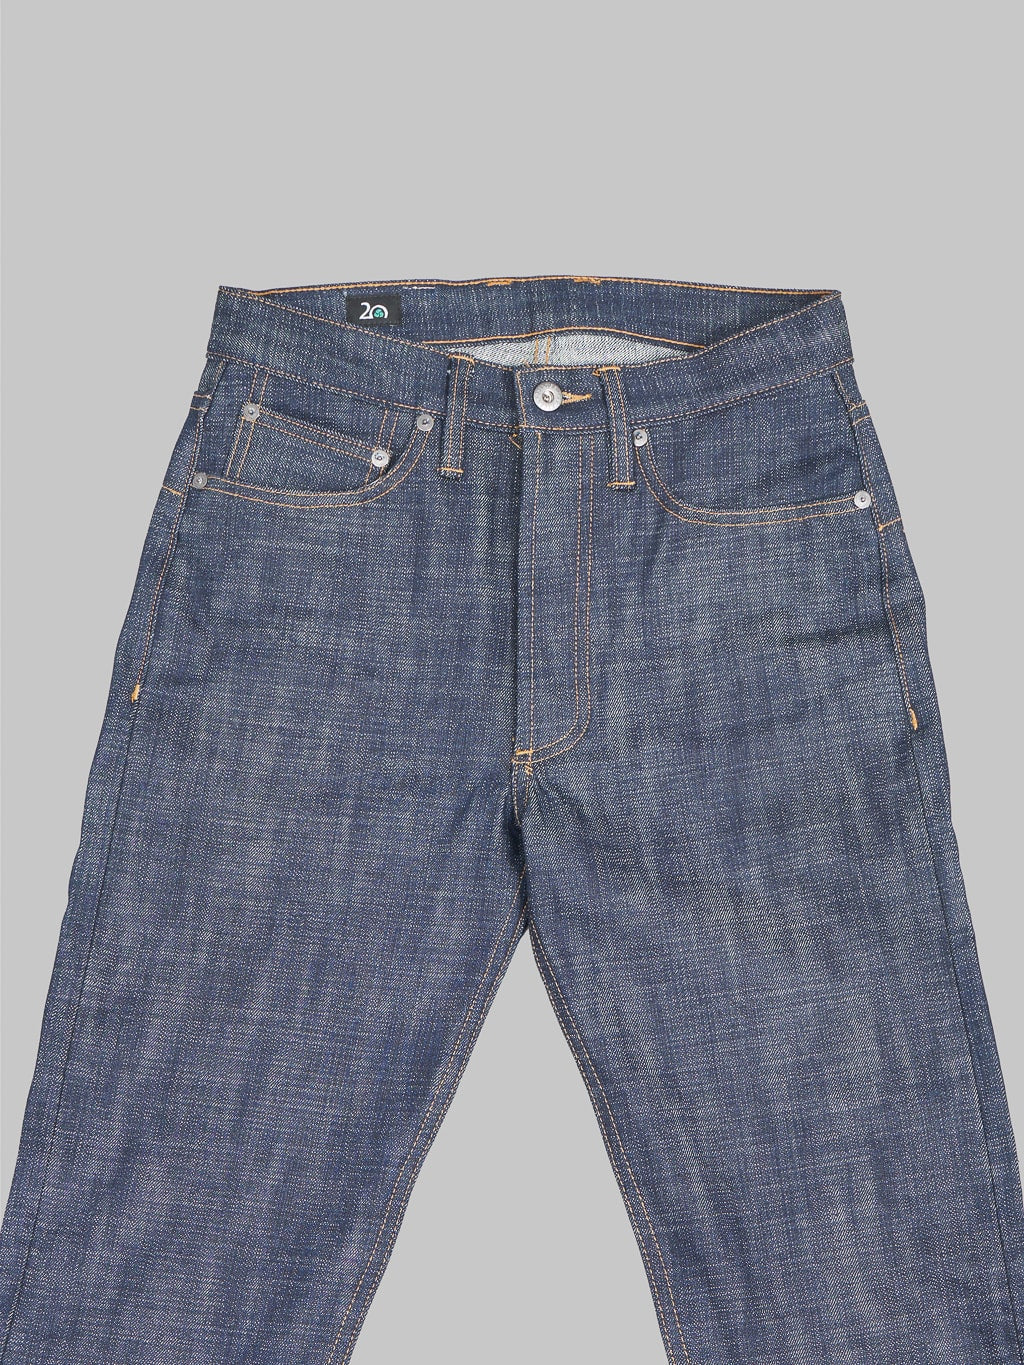 3sixteen CT 102xn 20th Anniversary Natural Indigo Jeans front details